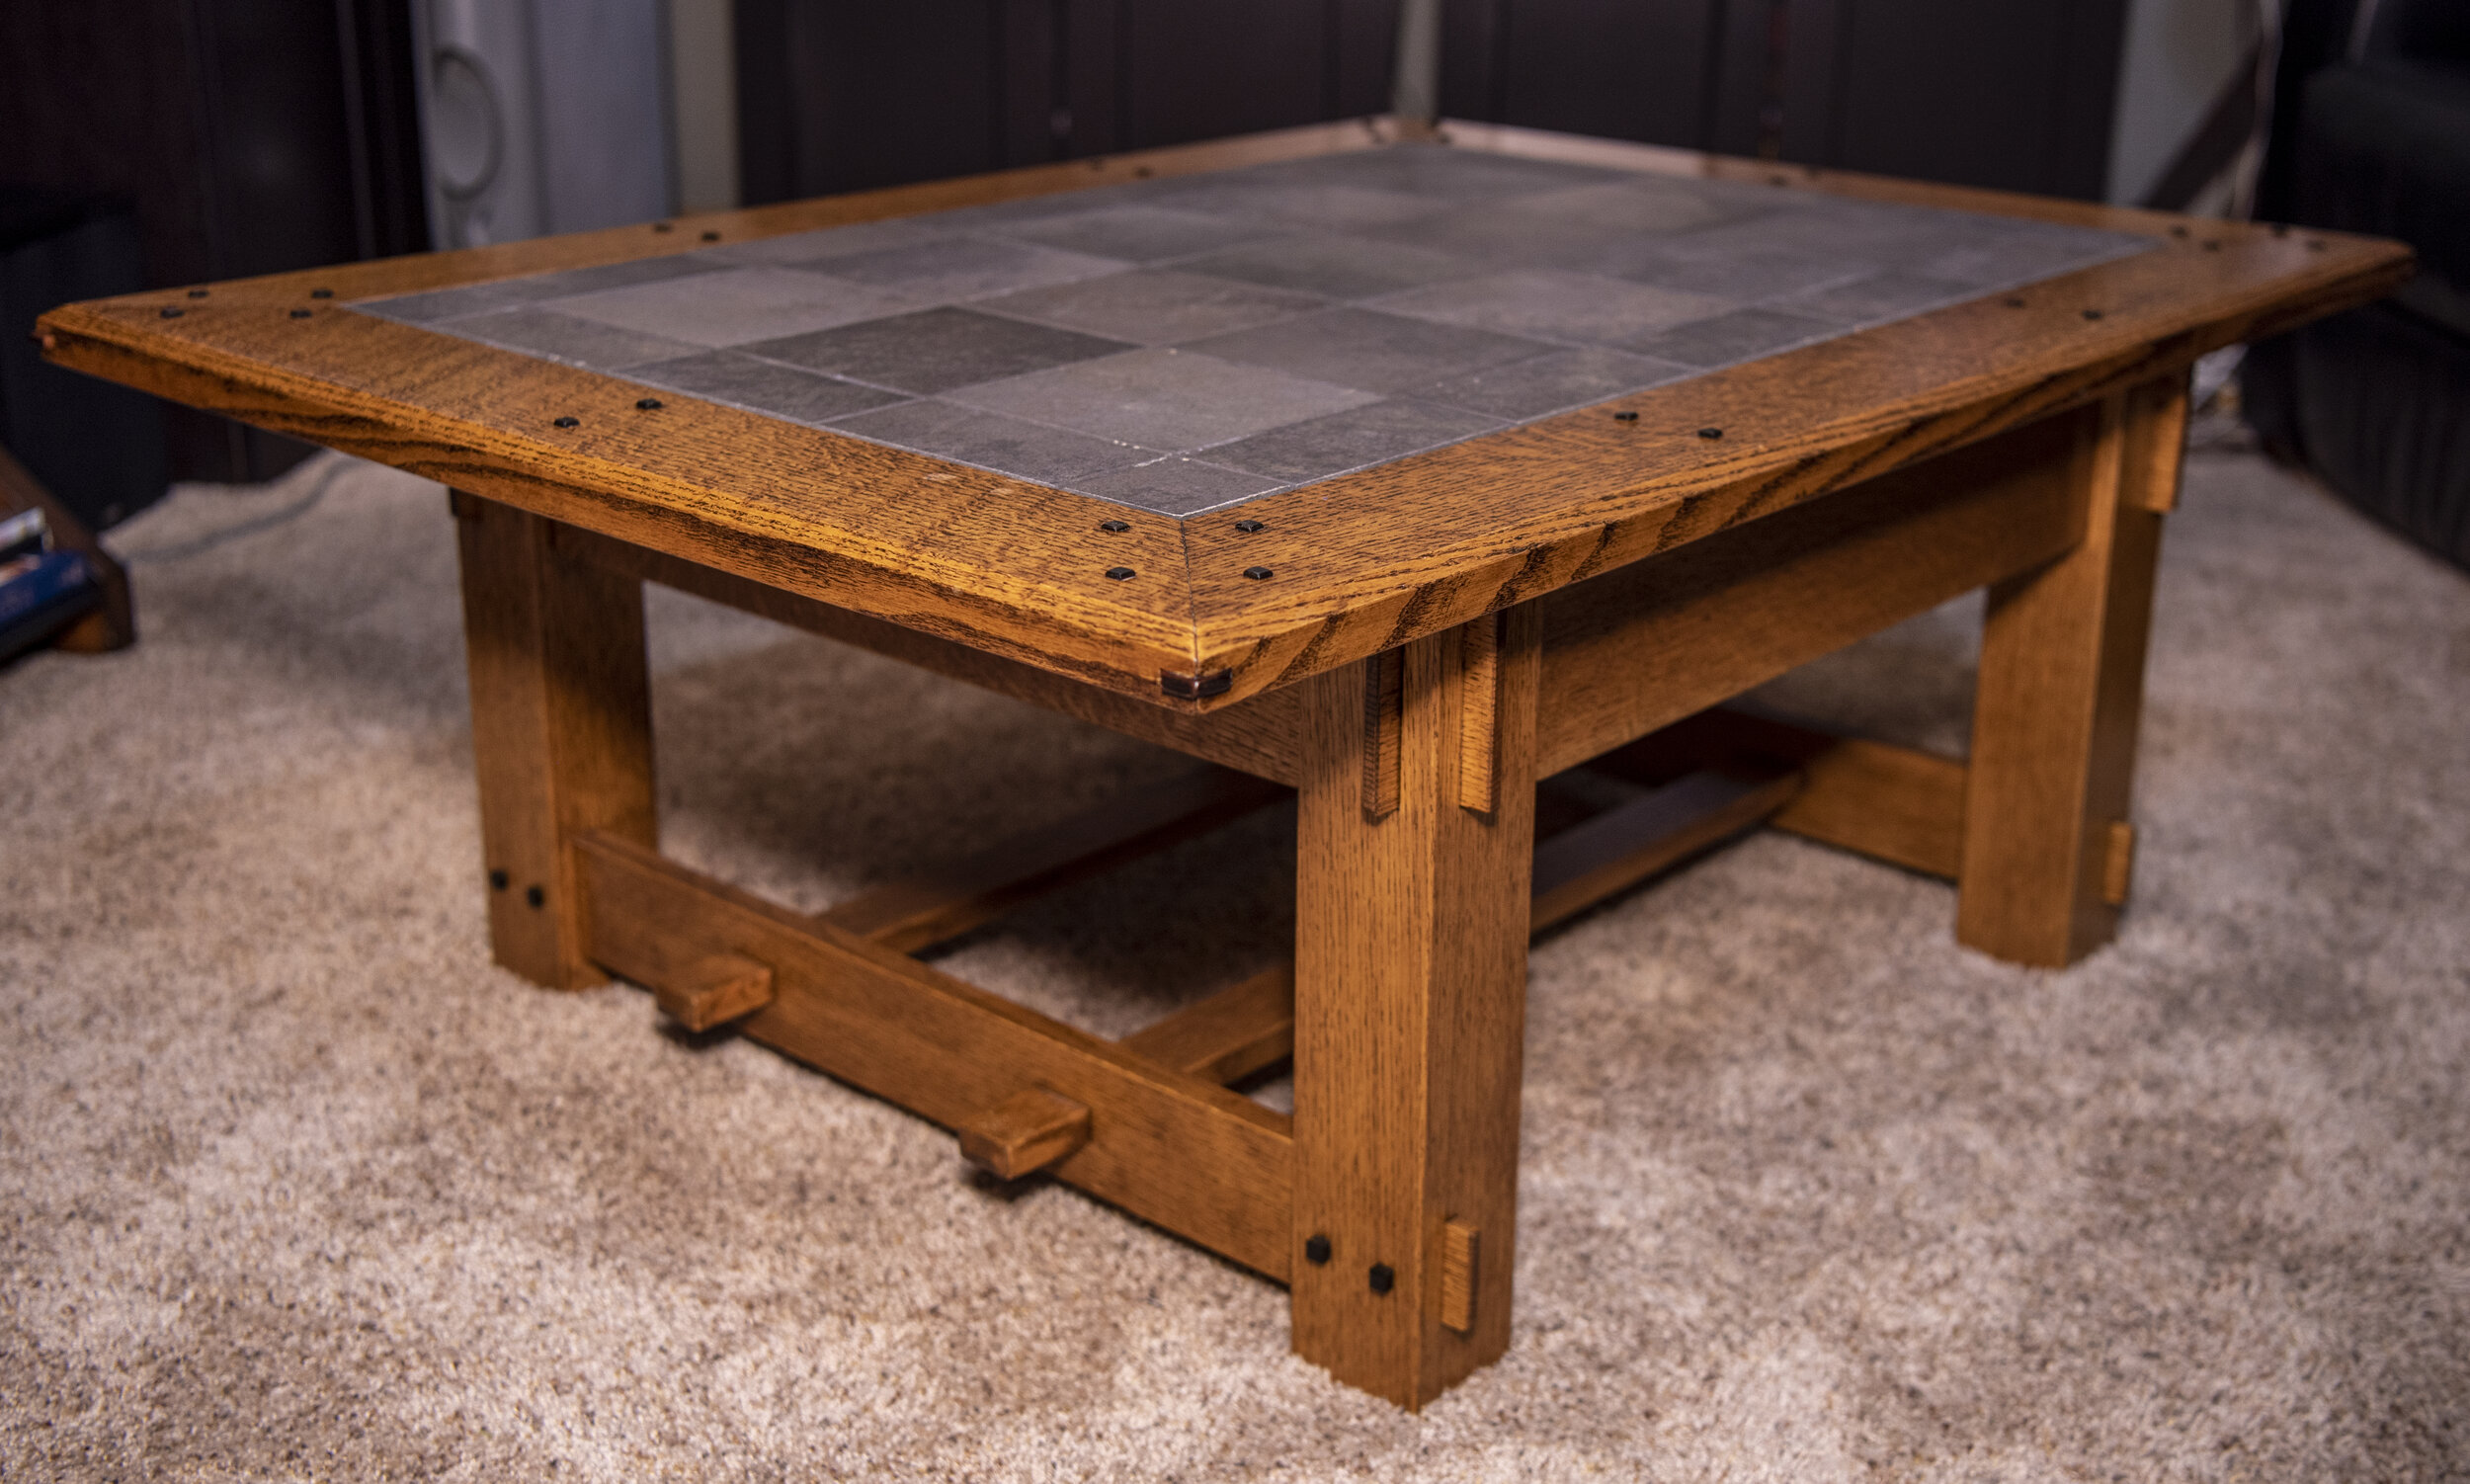 COFFEE TABLE WITH INLAID TILE TOP